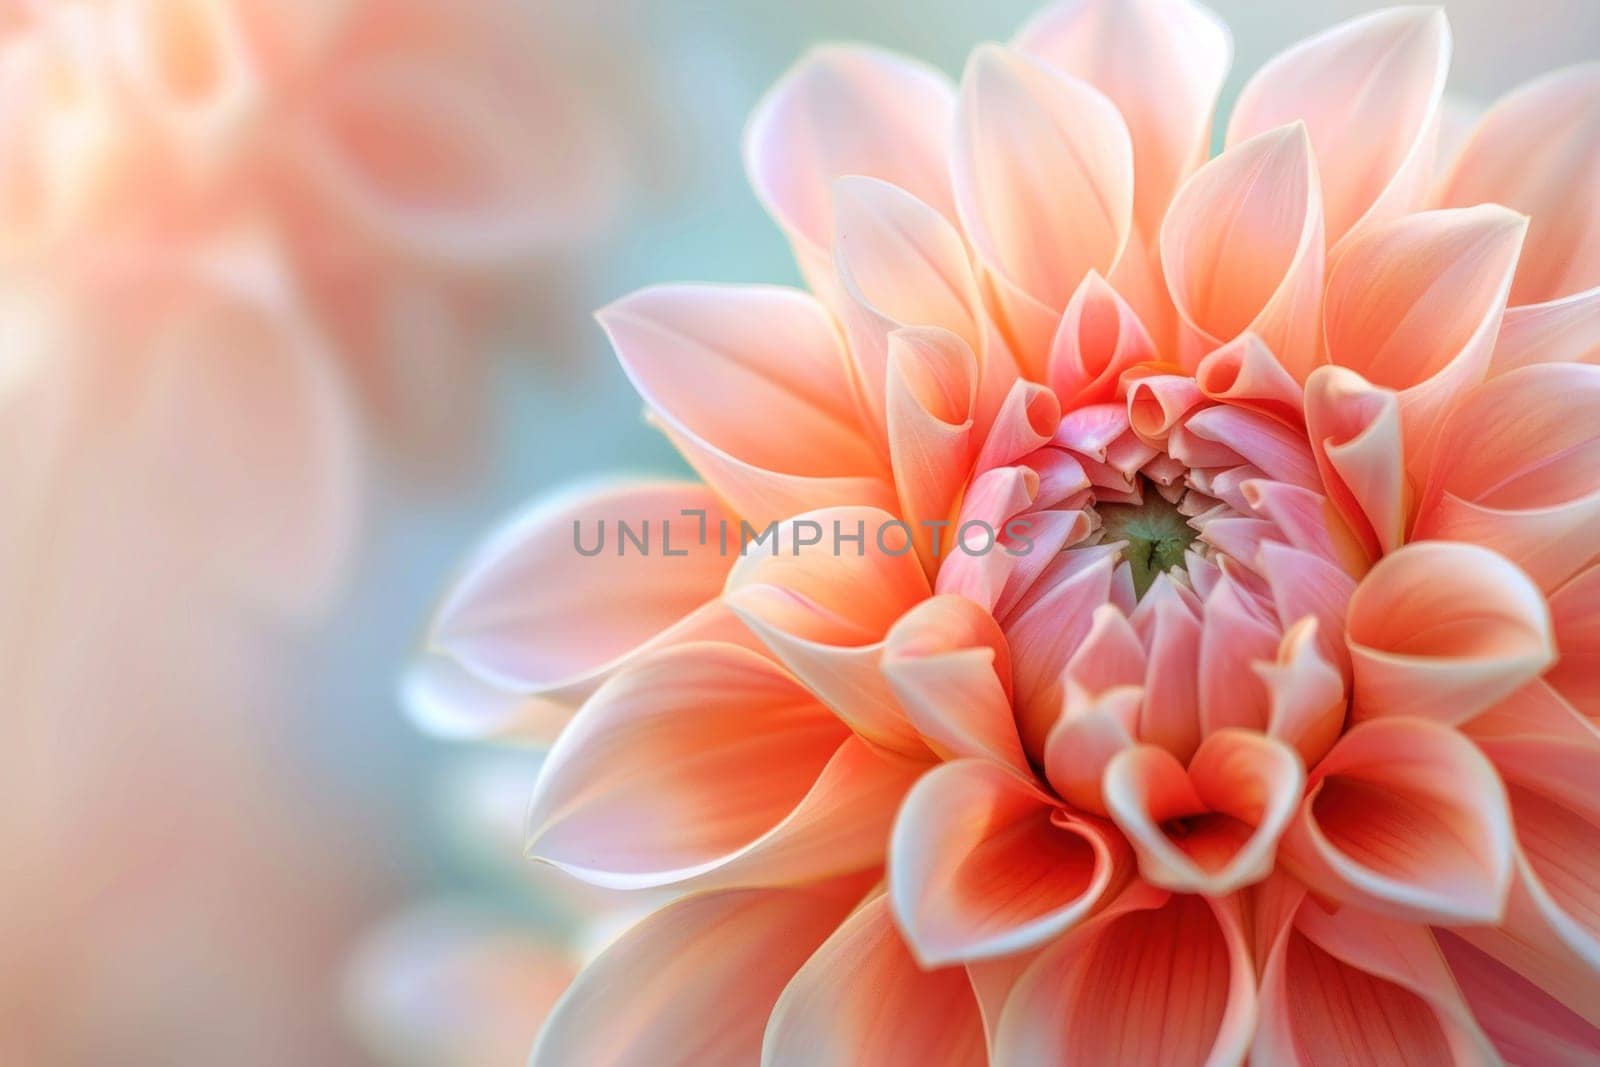 Closeup orange flower in natural beauty with blurred background for travel and nature enthusiasts